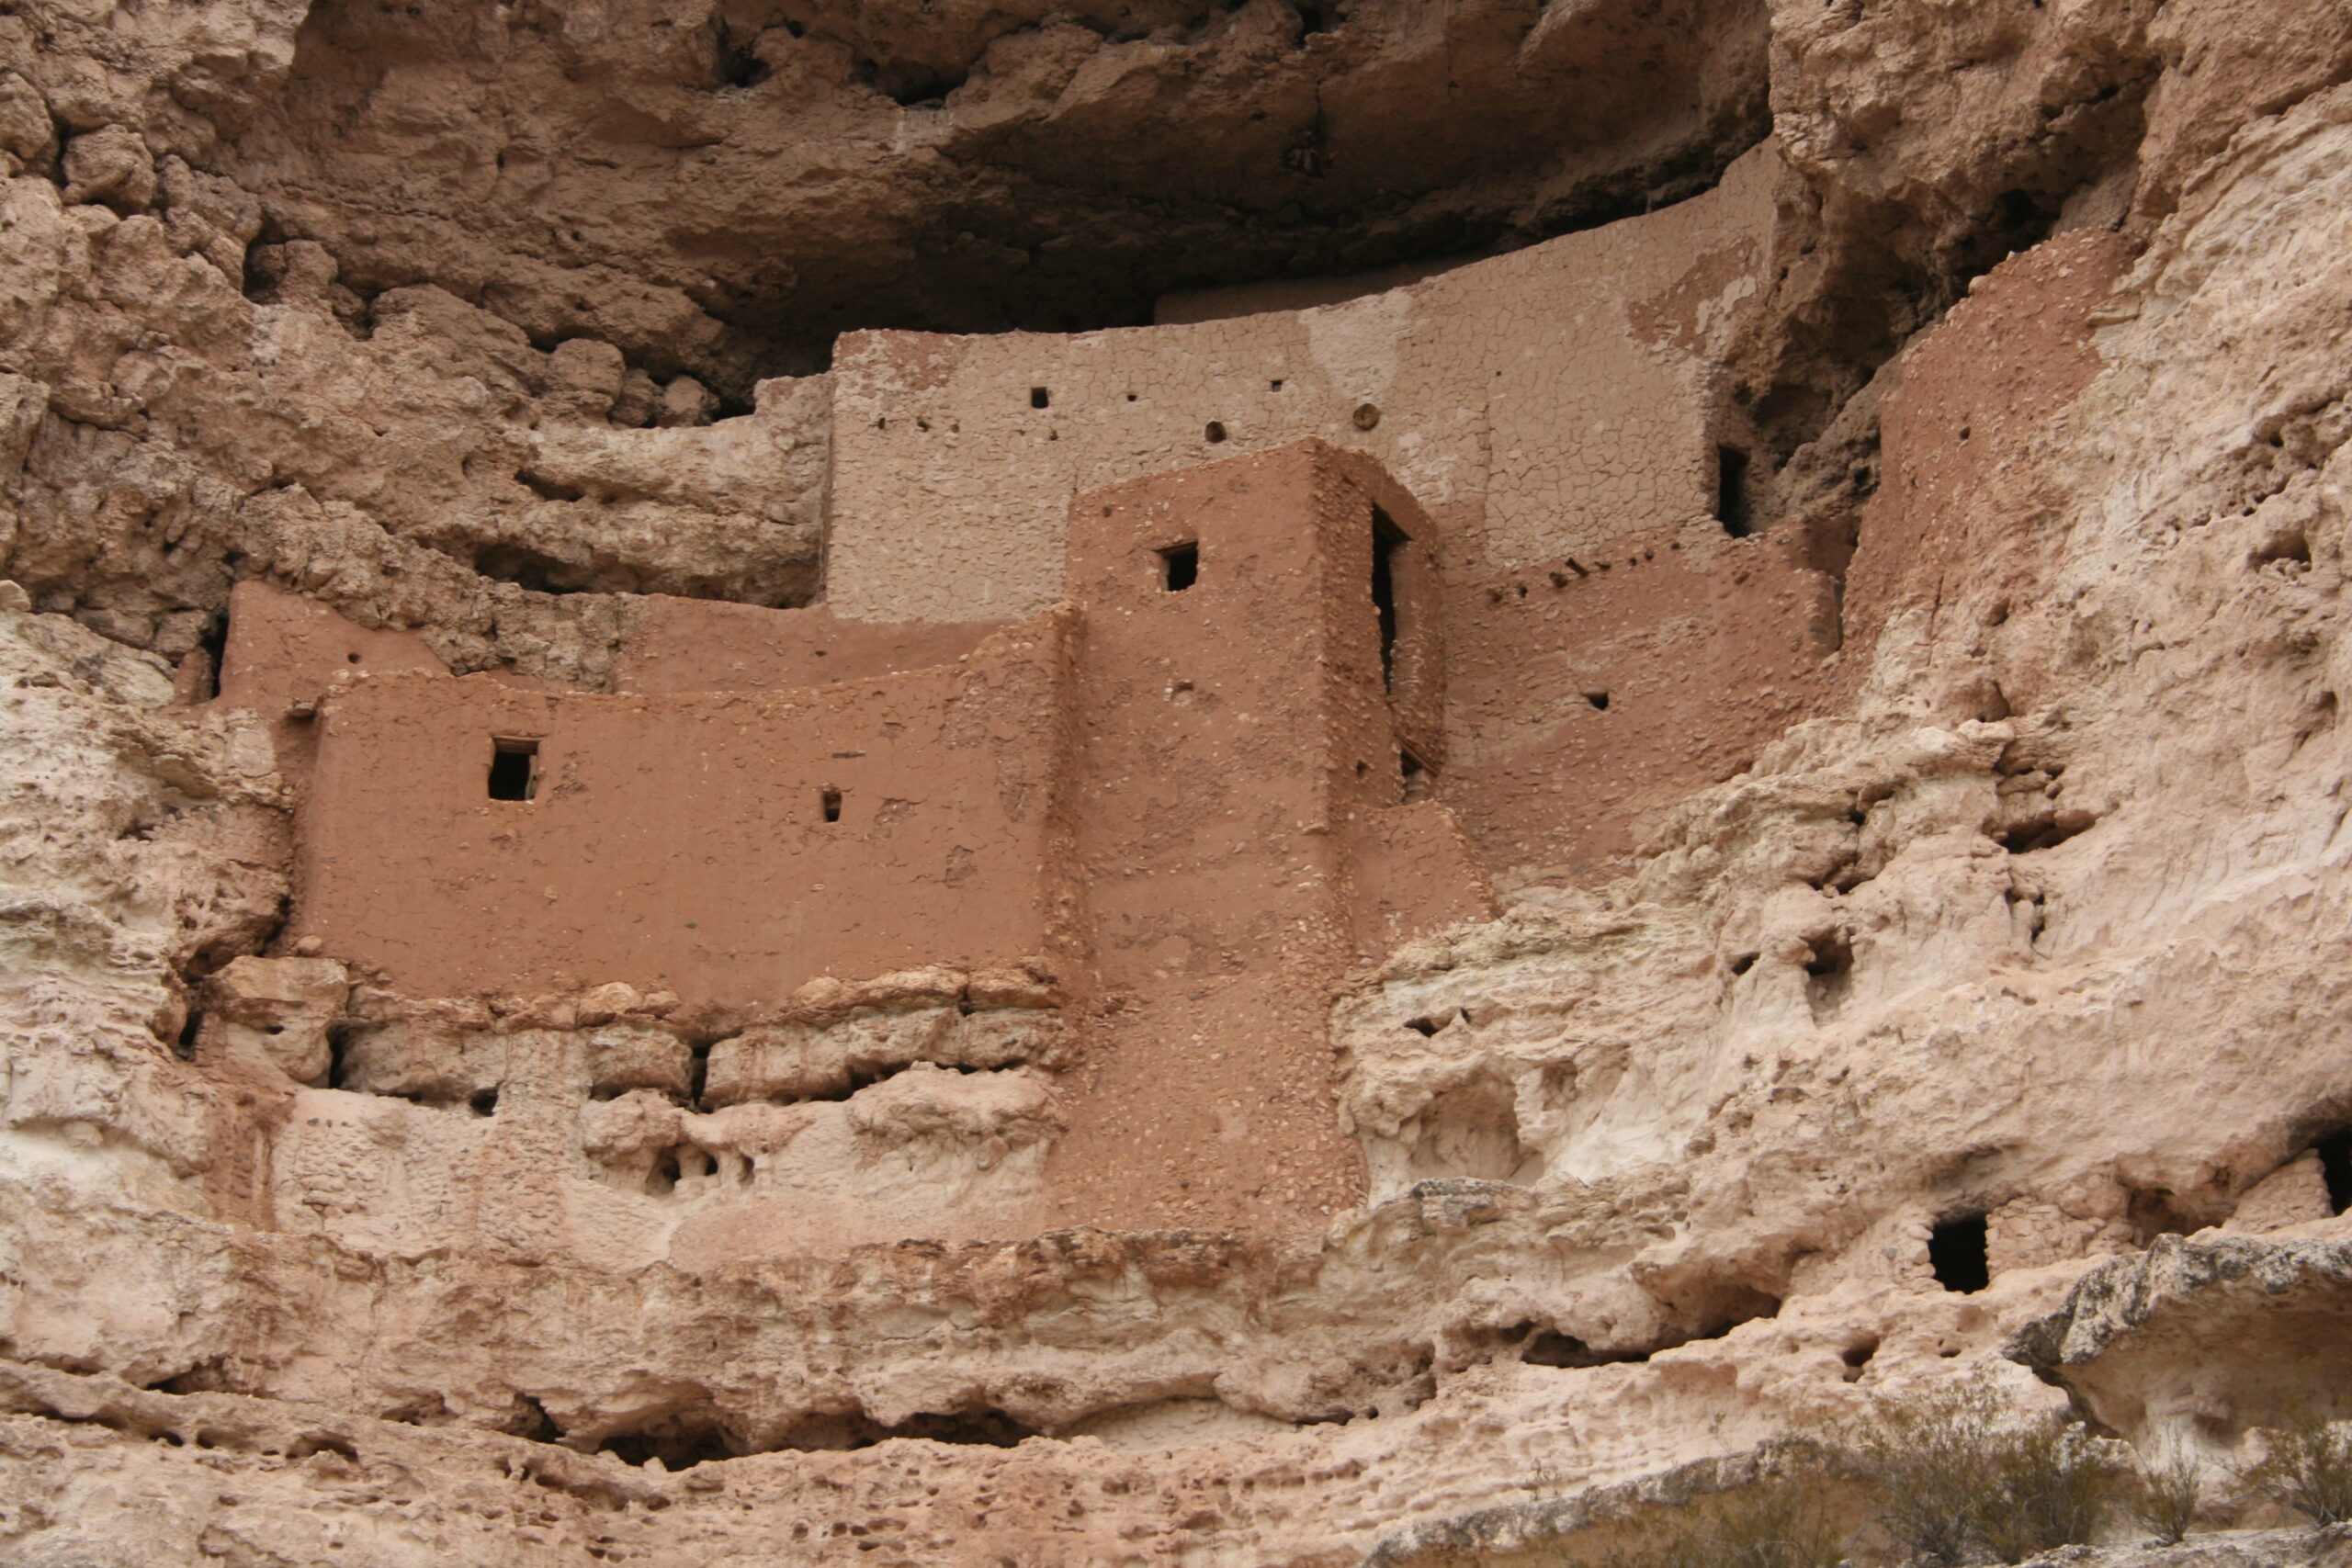 The Sinagua built Montezuma Castle, one of the best preserved cliff dwellings in North America.